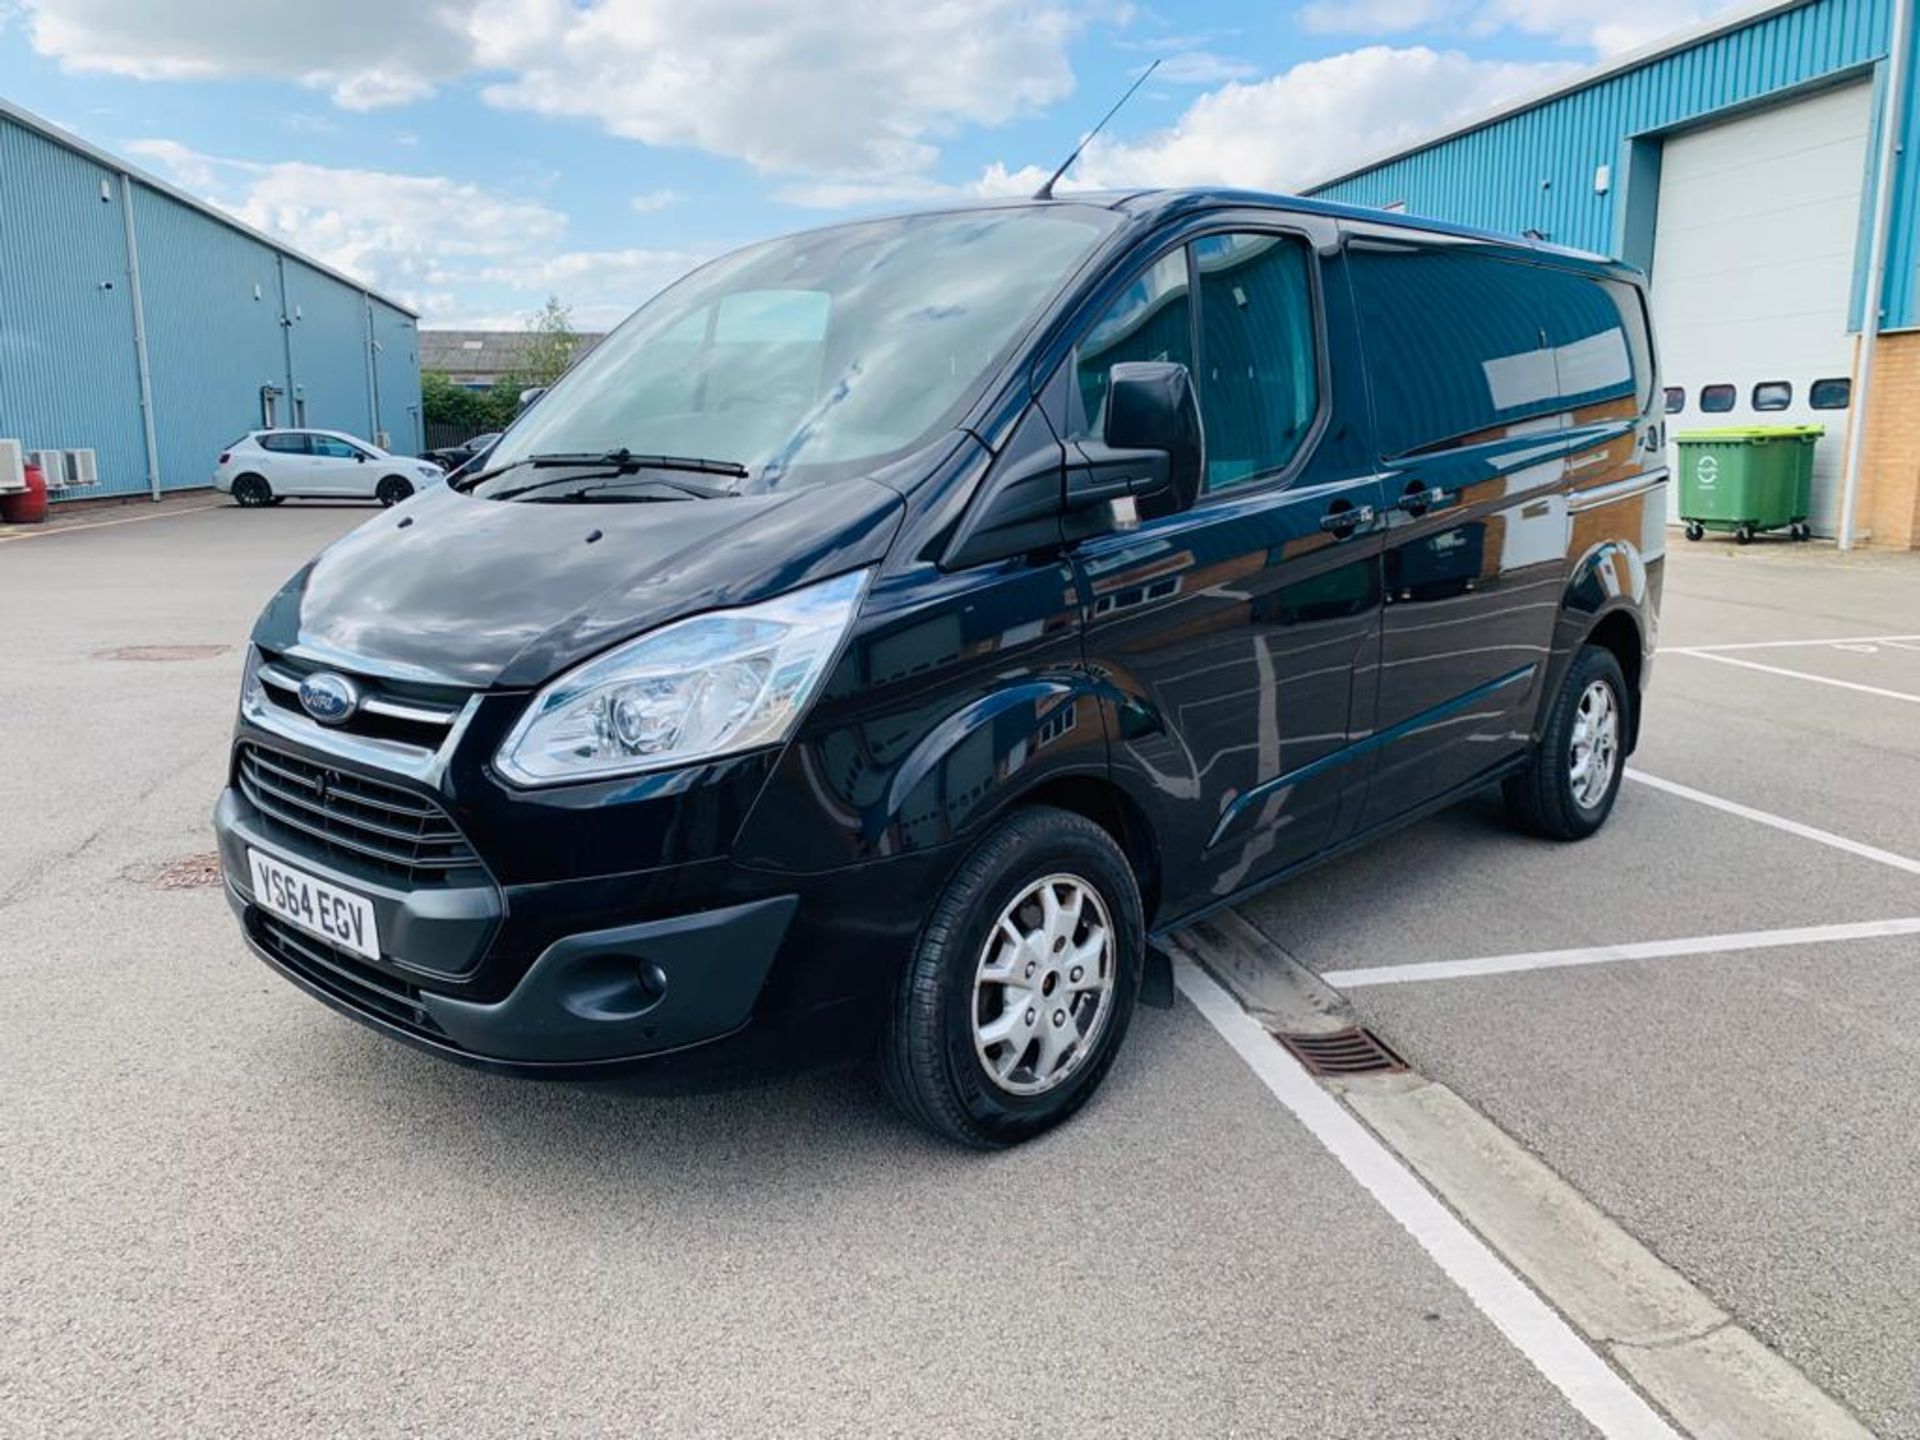 Ford Transit 2.2 TDCI Custom 270 Limited 2015 Model 6 Speed - Air Con - Park Assist - Image 2 of 26